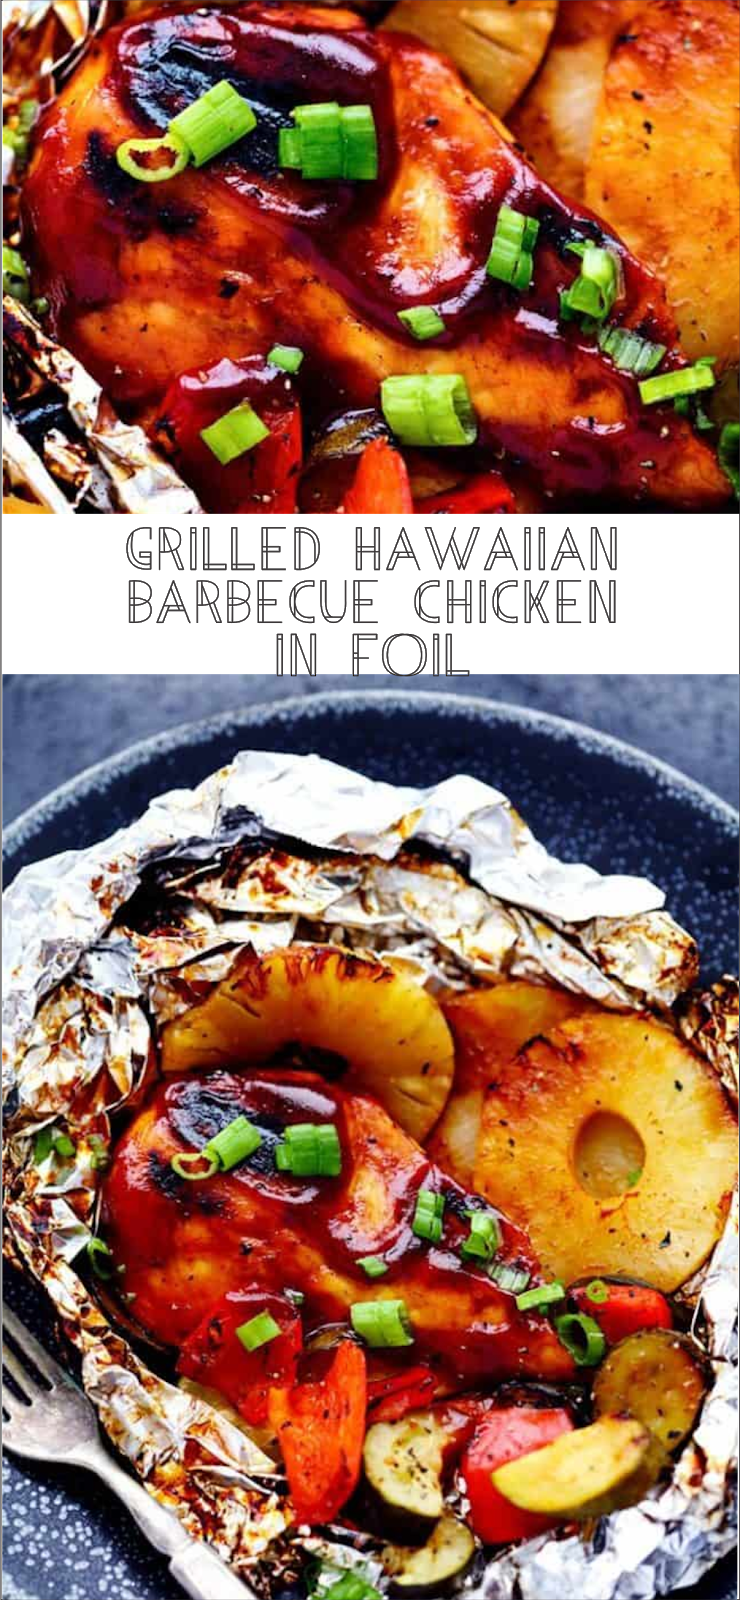 Grilled Hawaiian Barbecue Chicken in Foil | Floats CO